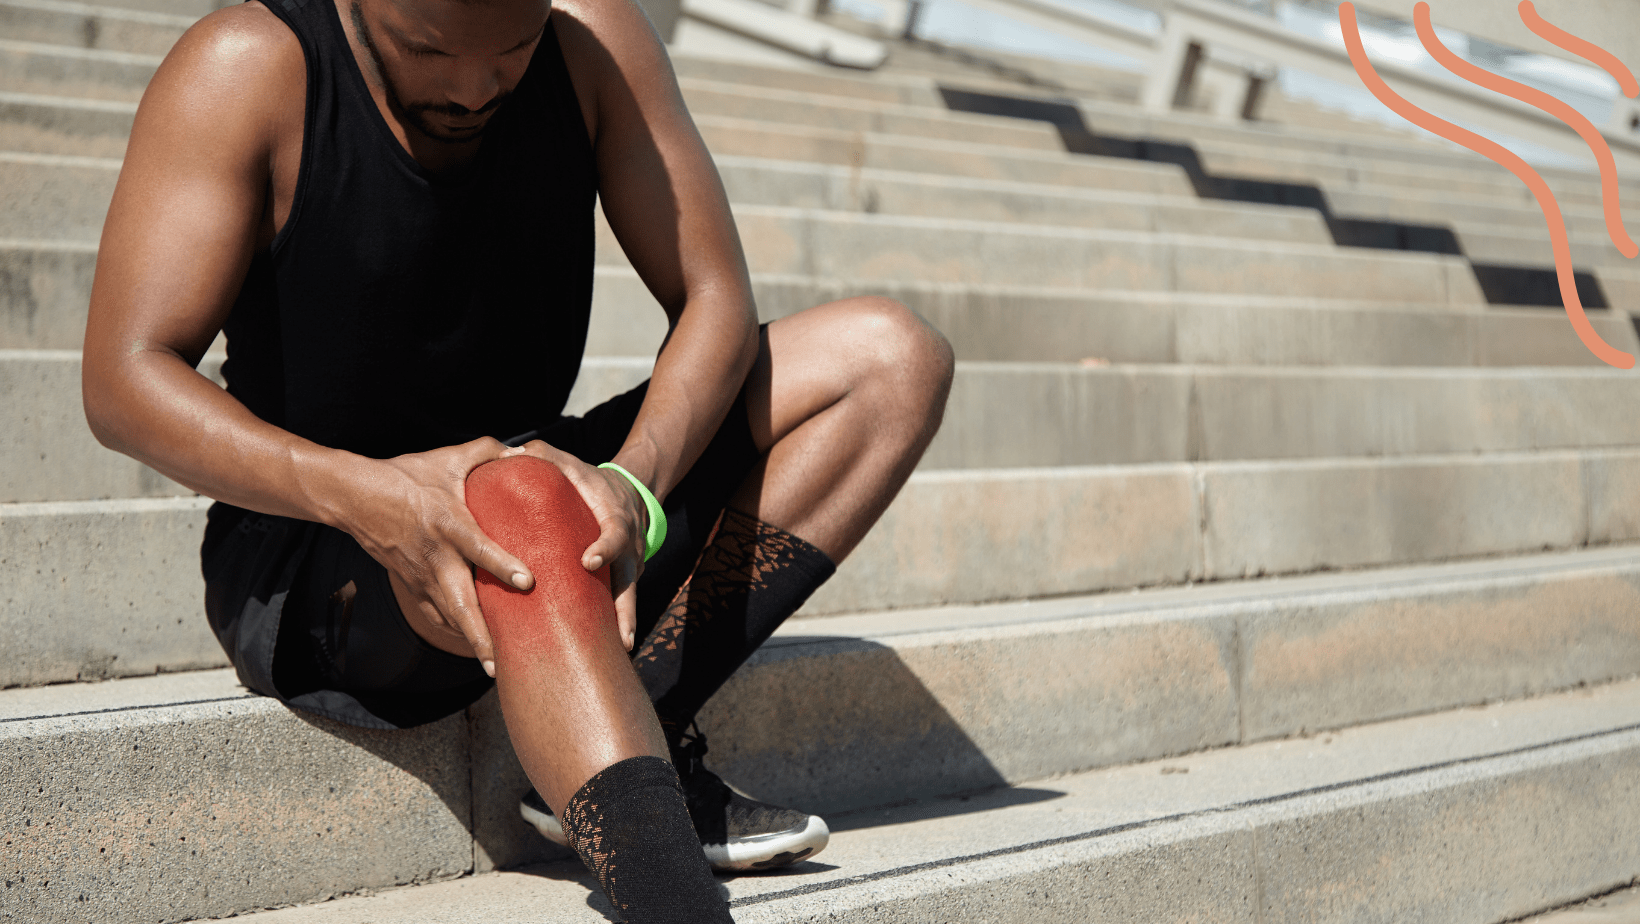 specialized treatments for joint injuries and disorders